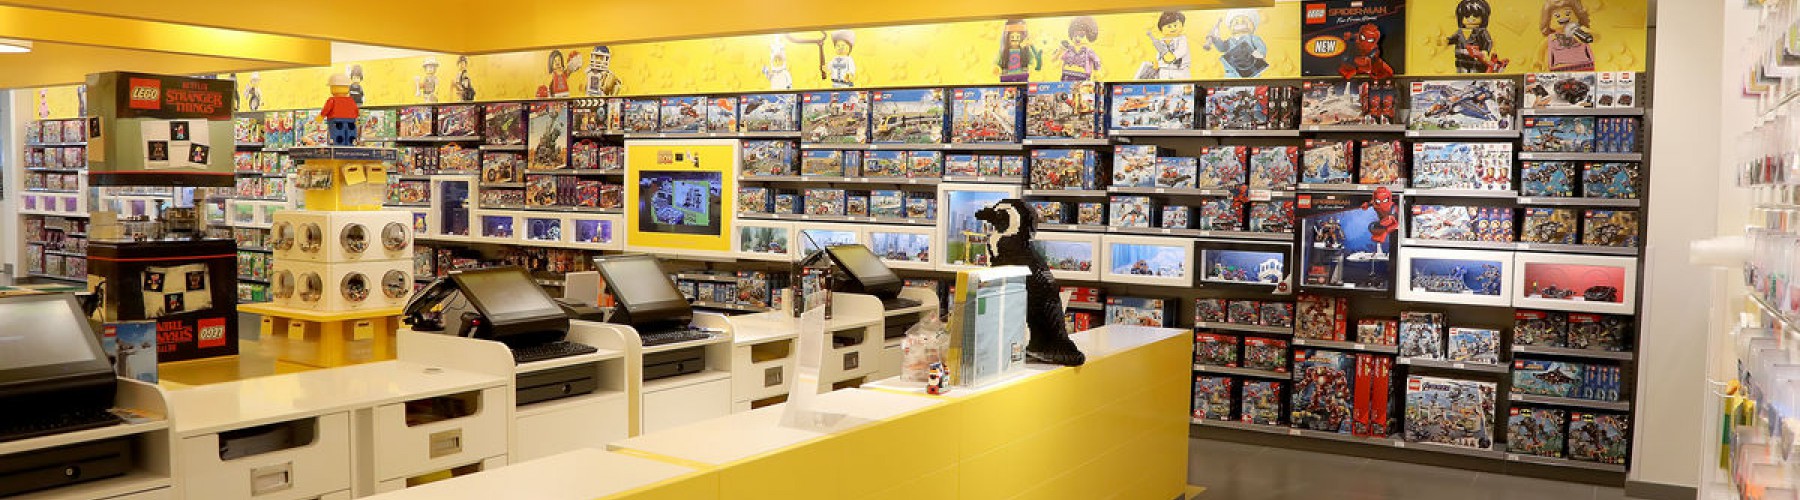 Lego Store at Ross Park Mall